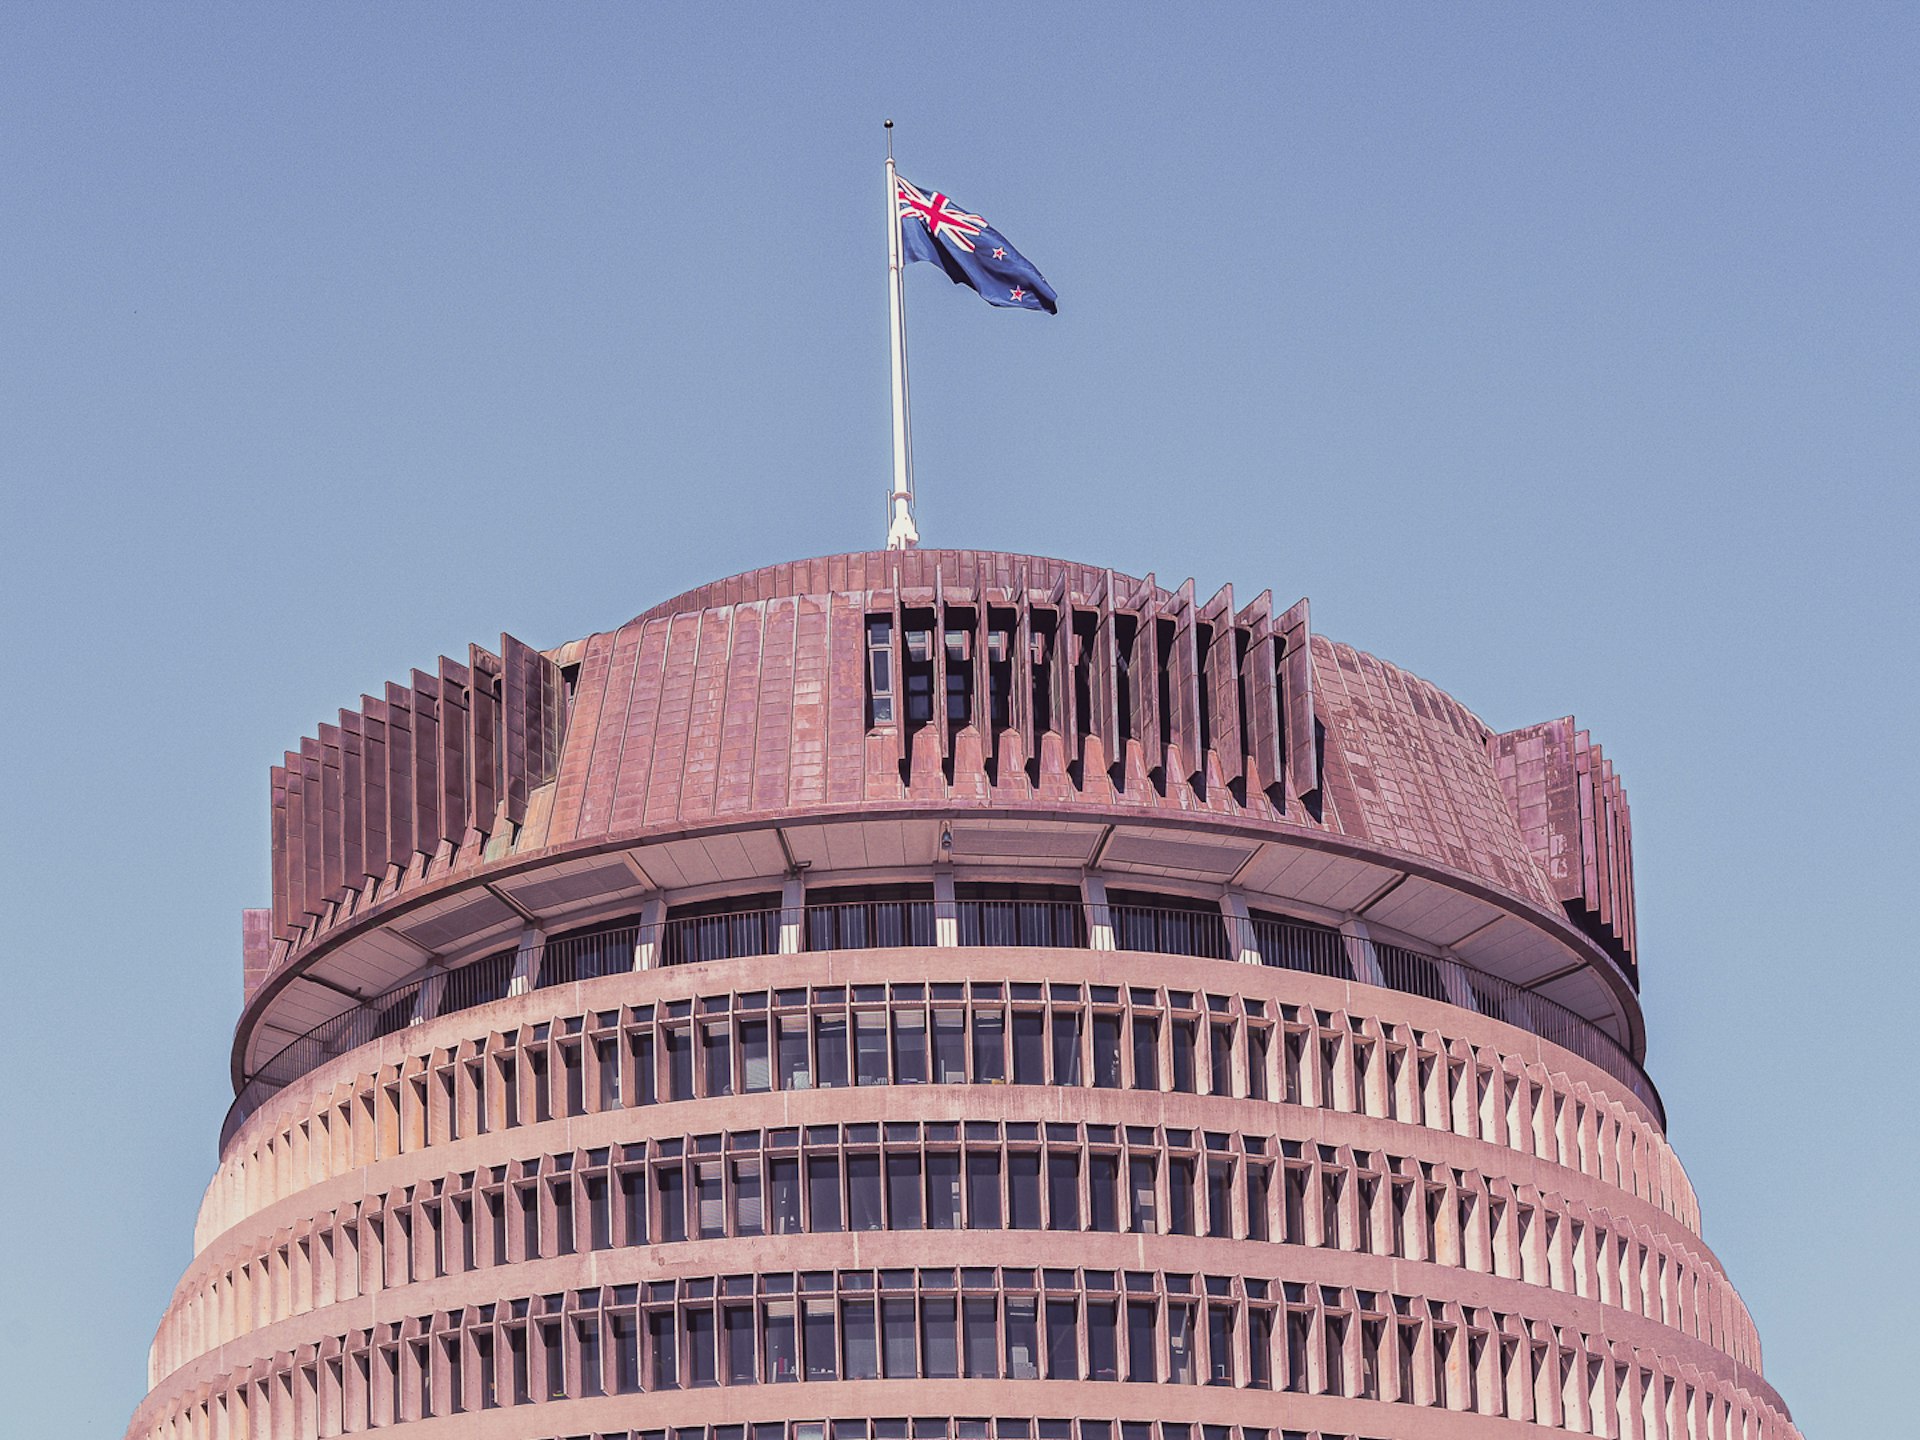 Top half of the Beehive building against a blue sky with the New Zealand flag flying.